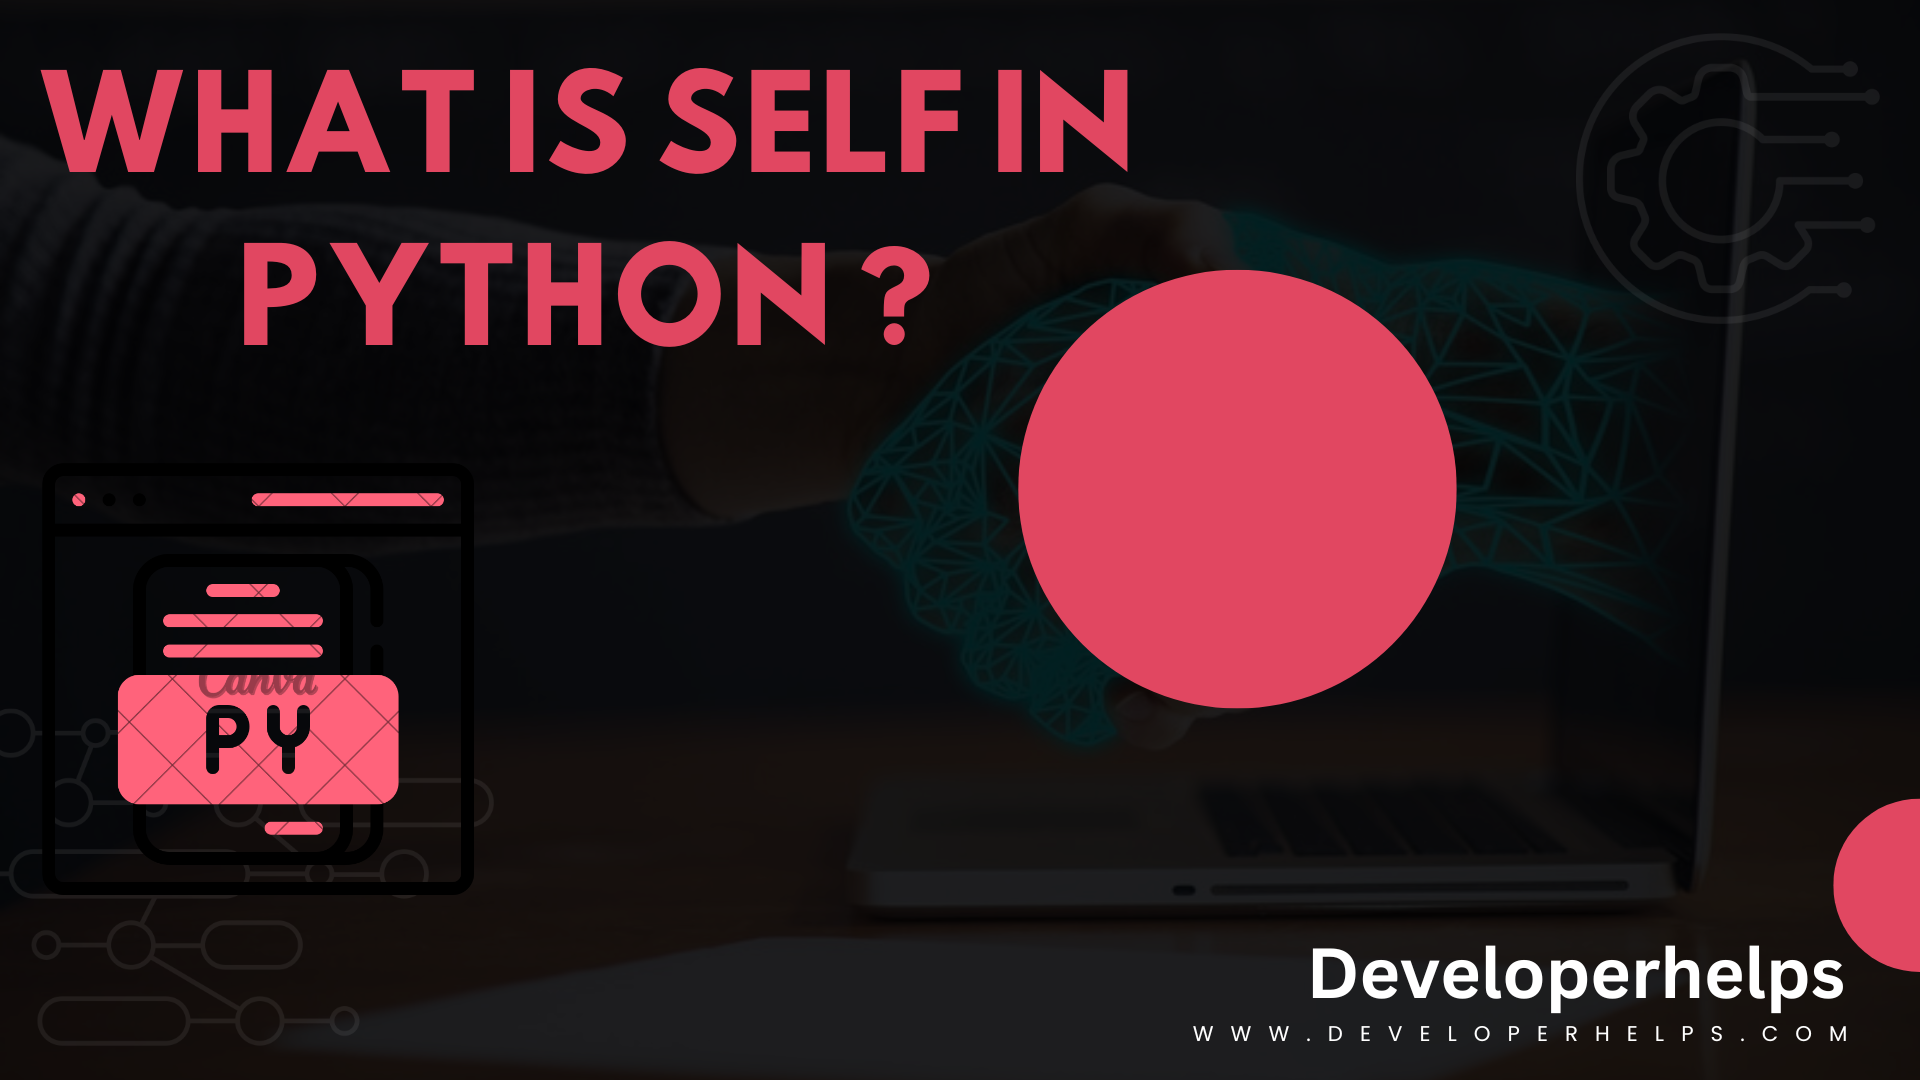 What is self in Python